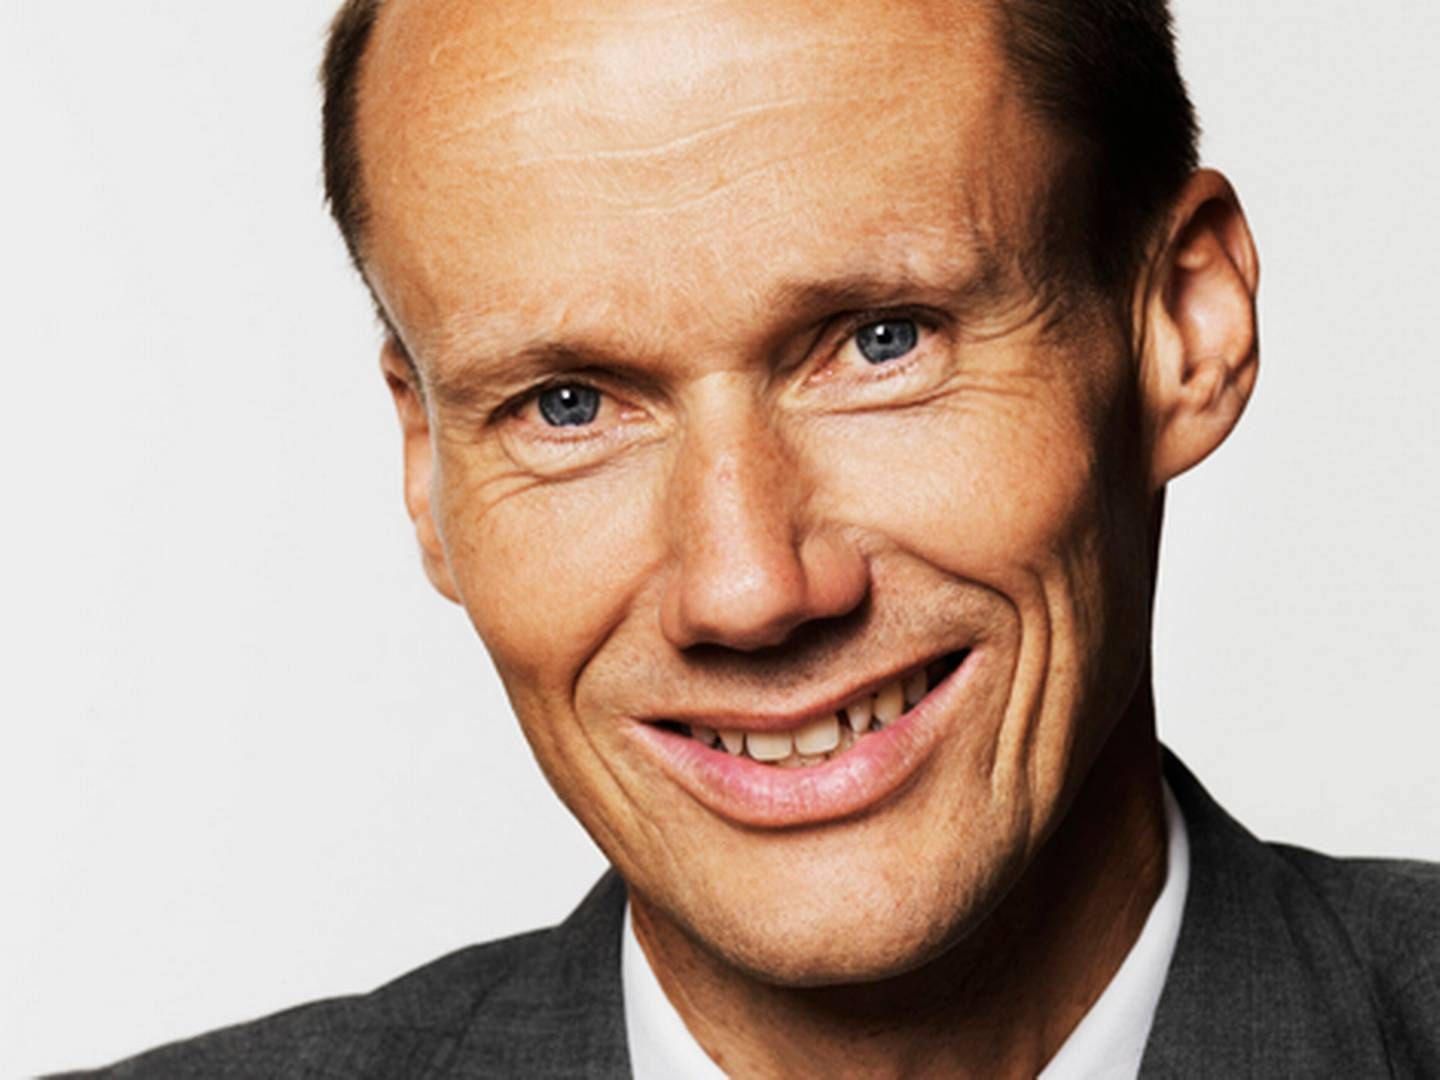 Jan Østergaard is head of private investments at Industrien's Pension